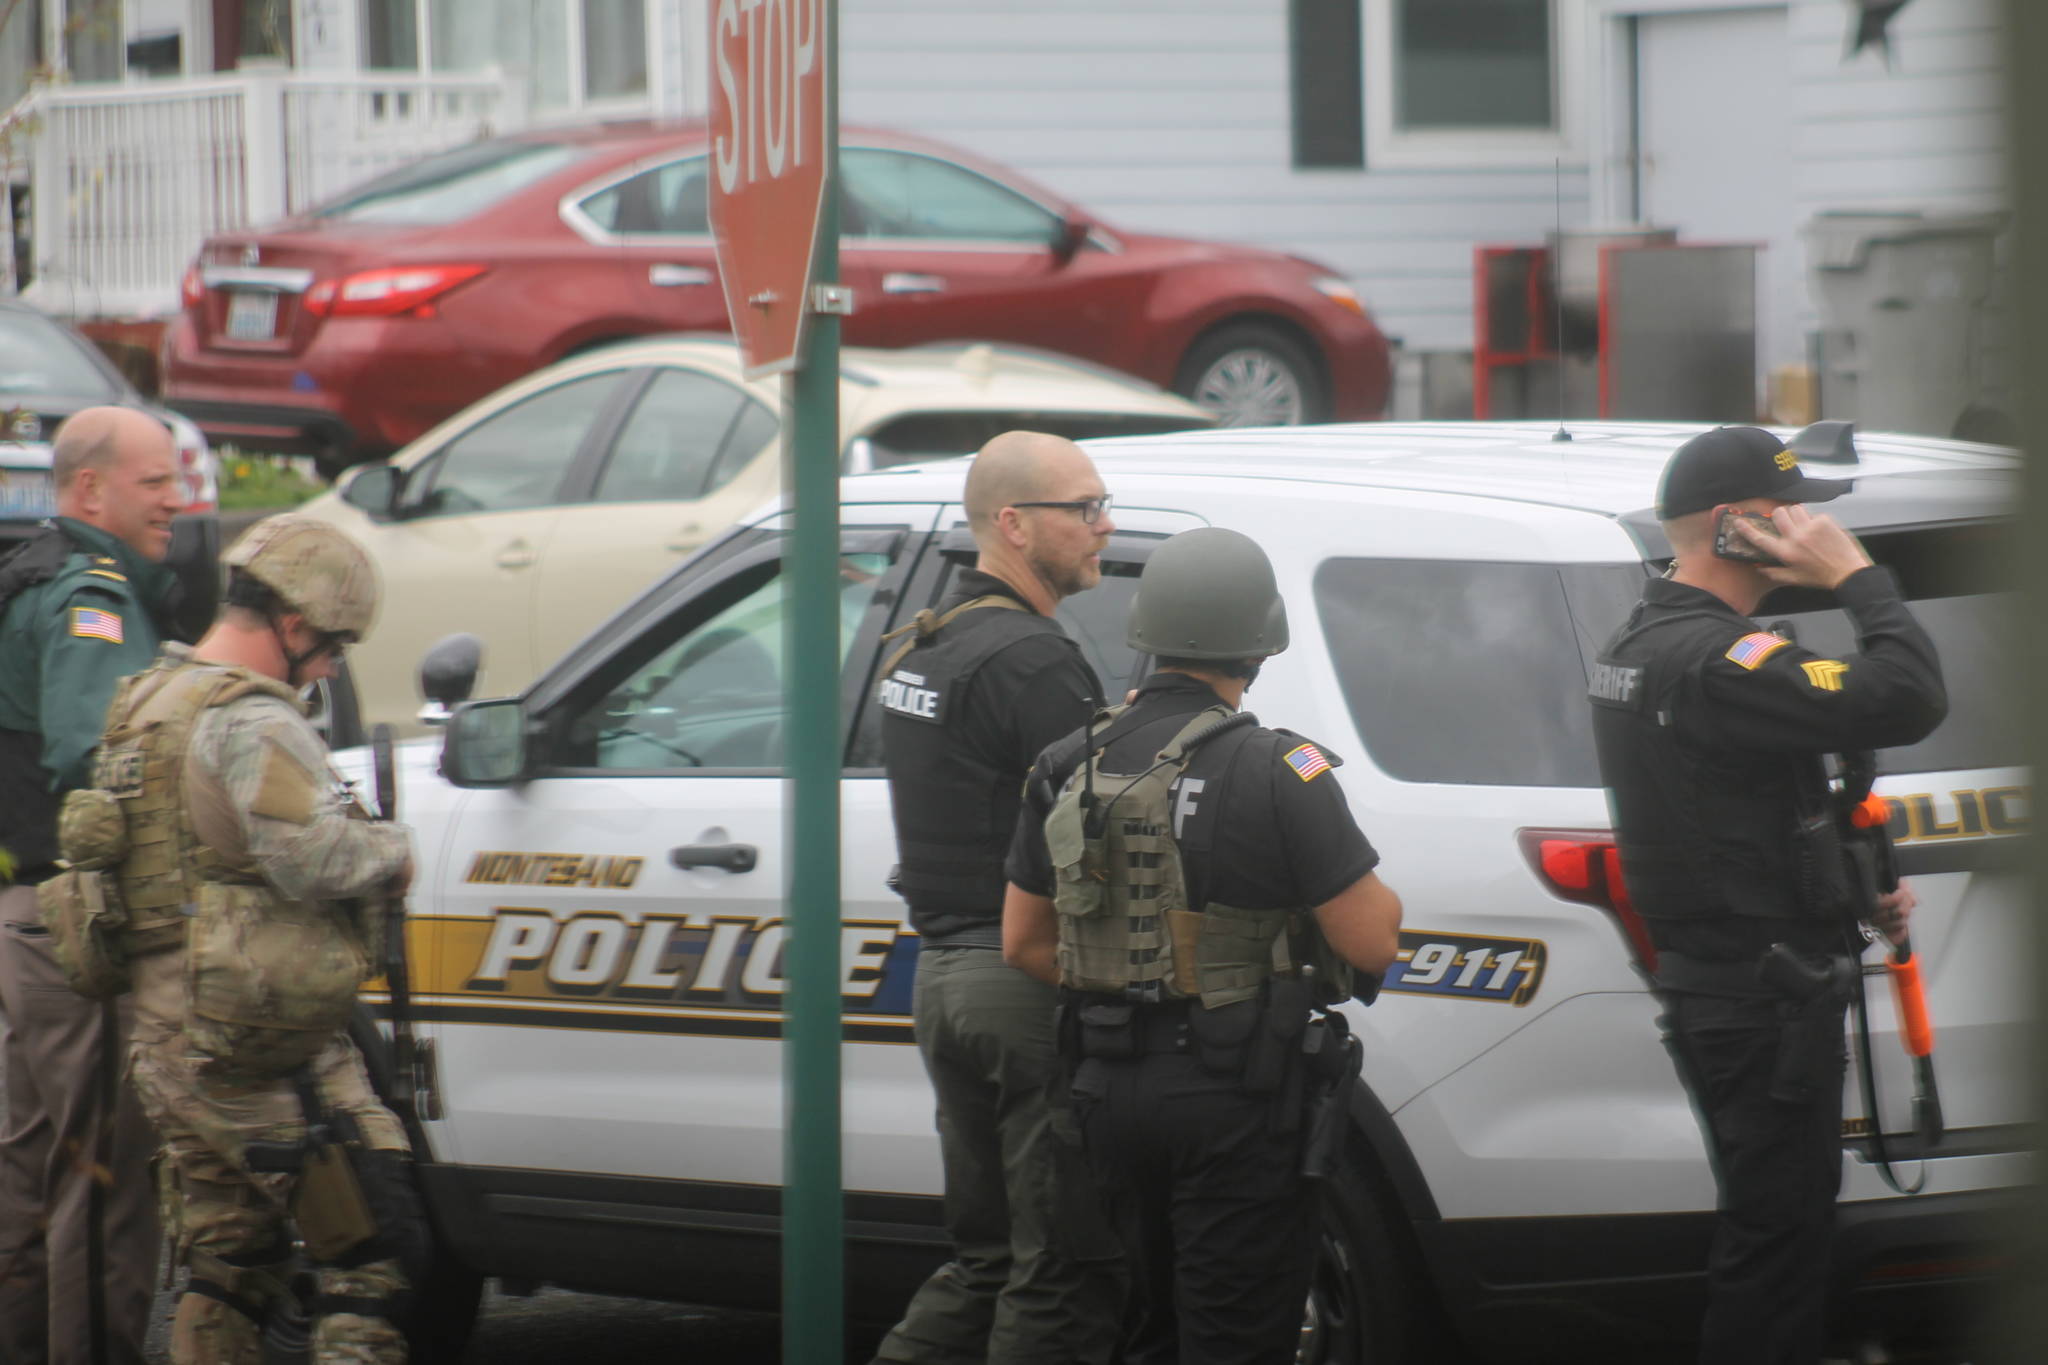 Officers from several different departments respond to a standoff situation Tuesday at a home on Academy Street in Montesano. One man, who officers say charged at them with swords, was shot and taken to Grays Harbor Community Hospital with what were described in the police statement as life-threatening injuries. (Josh Jessen photo)